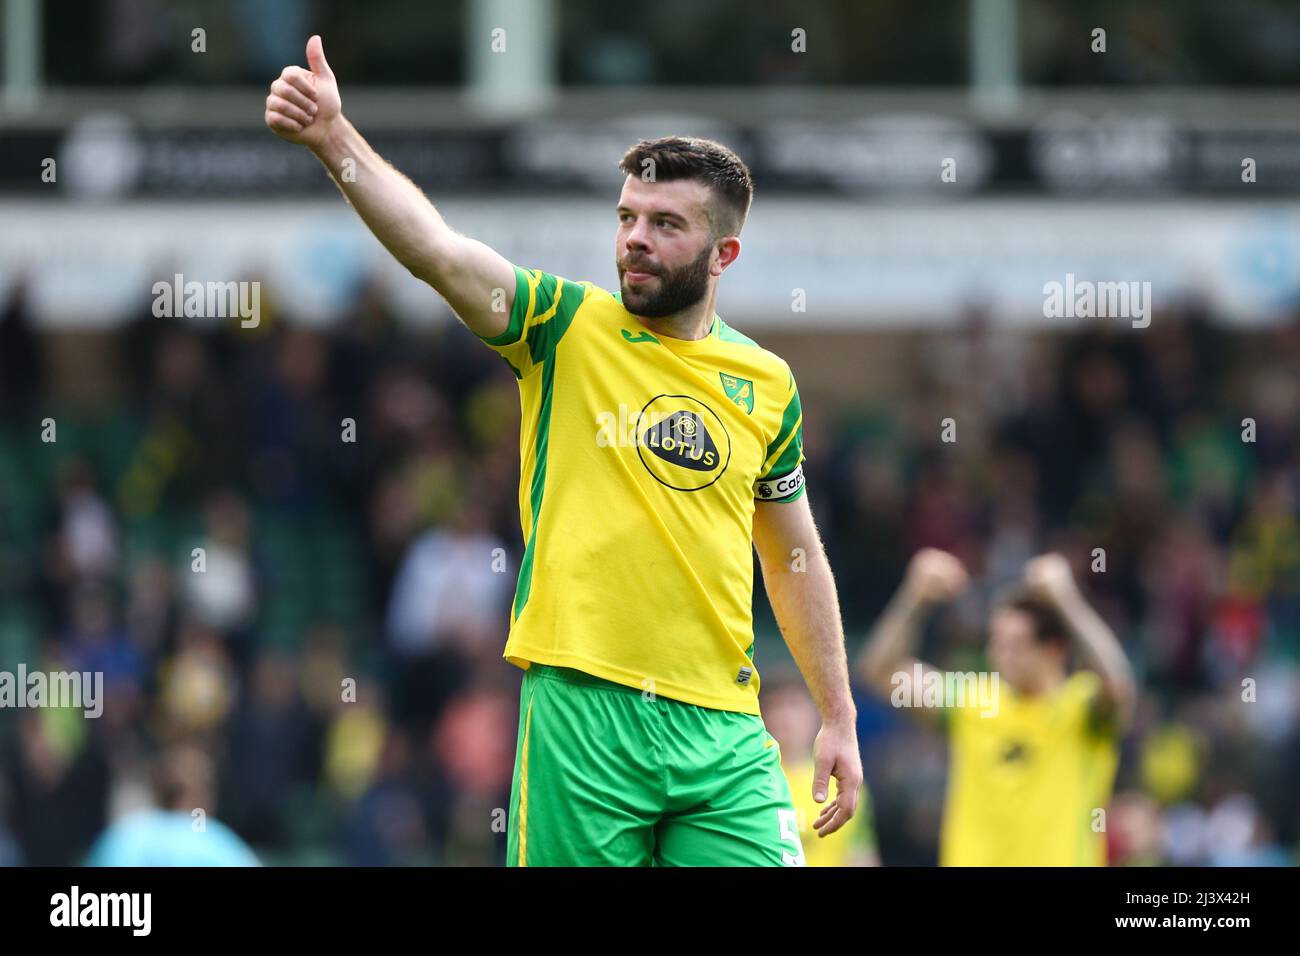 Grant Hanley #5 of Norwich City celebrates at the final whistle Stock Photo